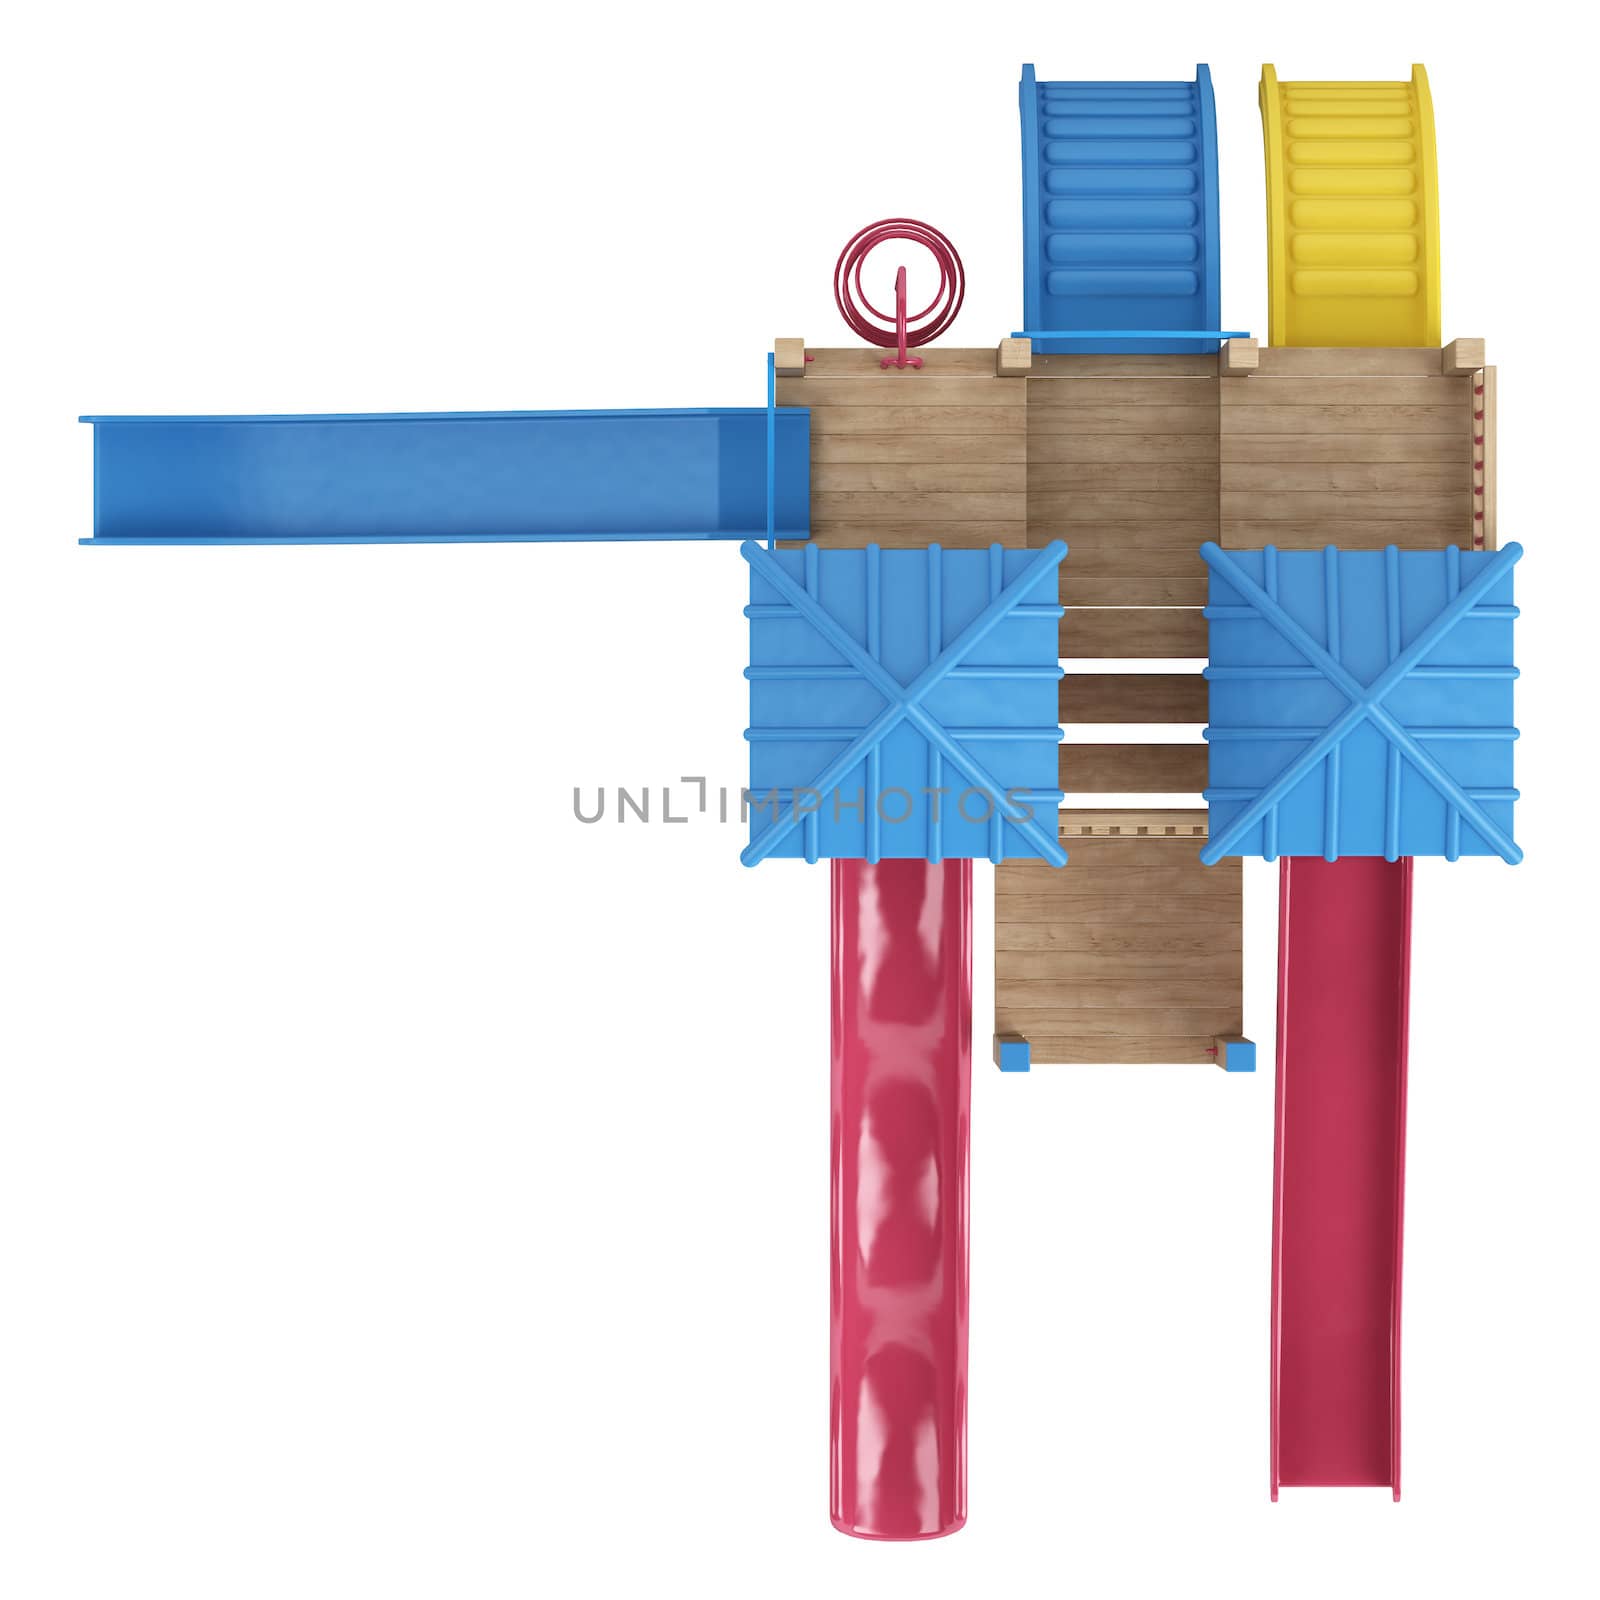 Chilrens wooden playground equipment with covered platforms and three slides isolated on a white background